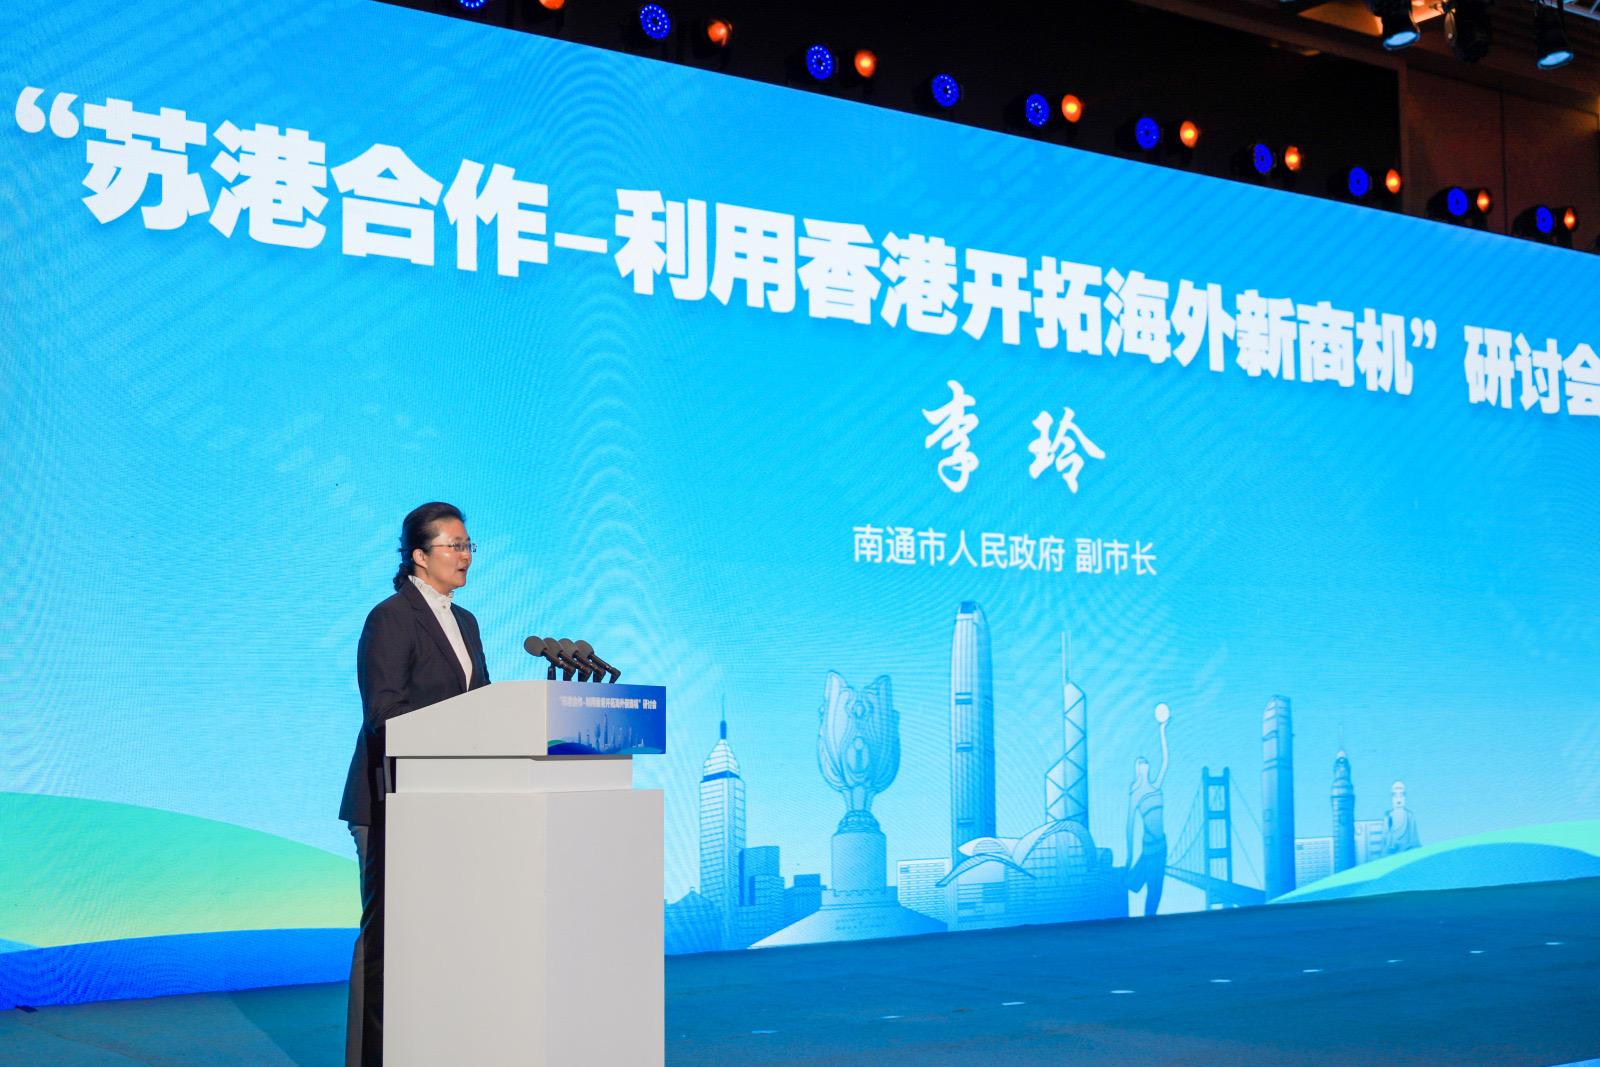 Invest Hong Kong and Jiangsu Provincial Government co-hosted a seminar in Nantong, Jiangsu Province today (November 7), encouraging Jiangsu enterprises to make use of Hong Kong's business advantages and opportunities amid the Belt and Road Initiative and the Guangdong-Hong Kong-Macao Greater Bay Area development to accelerate their overseas expansion. Photo shows Vice Mayor of the People's Government of Nantong Municipality Ms Li Ling delivering welcome remarks.


